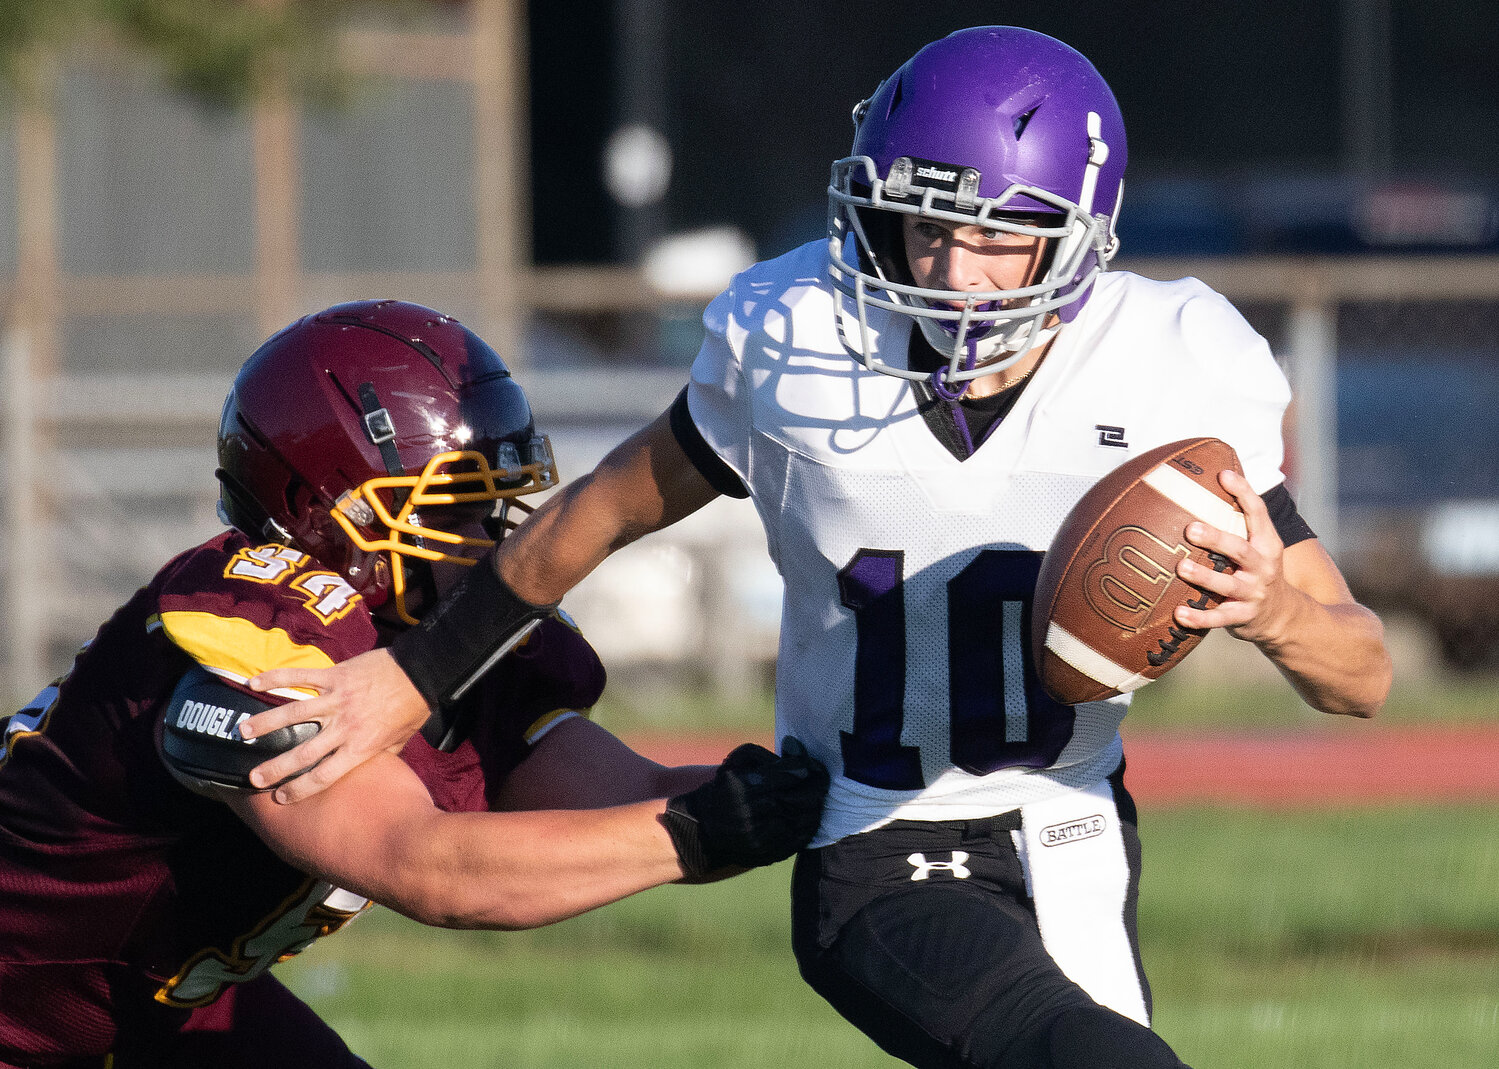 Huskies quarterback Ethan Martel brushes off a Tiverton defender while looking to make a pass during Mt. Hope's 21-0 victory over Tiverton during an injury fund game in Barrington on Thursday night.